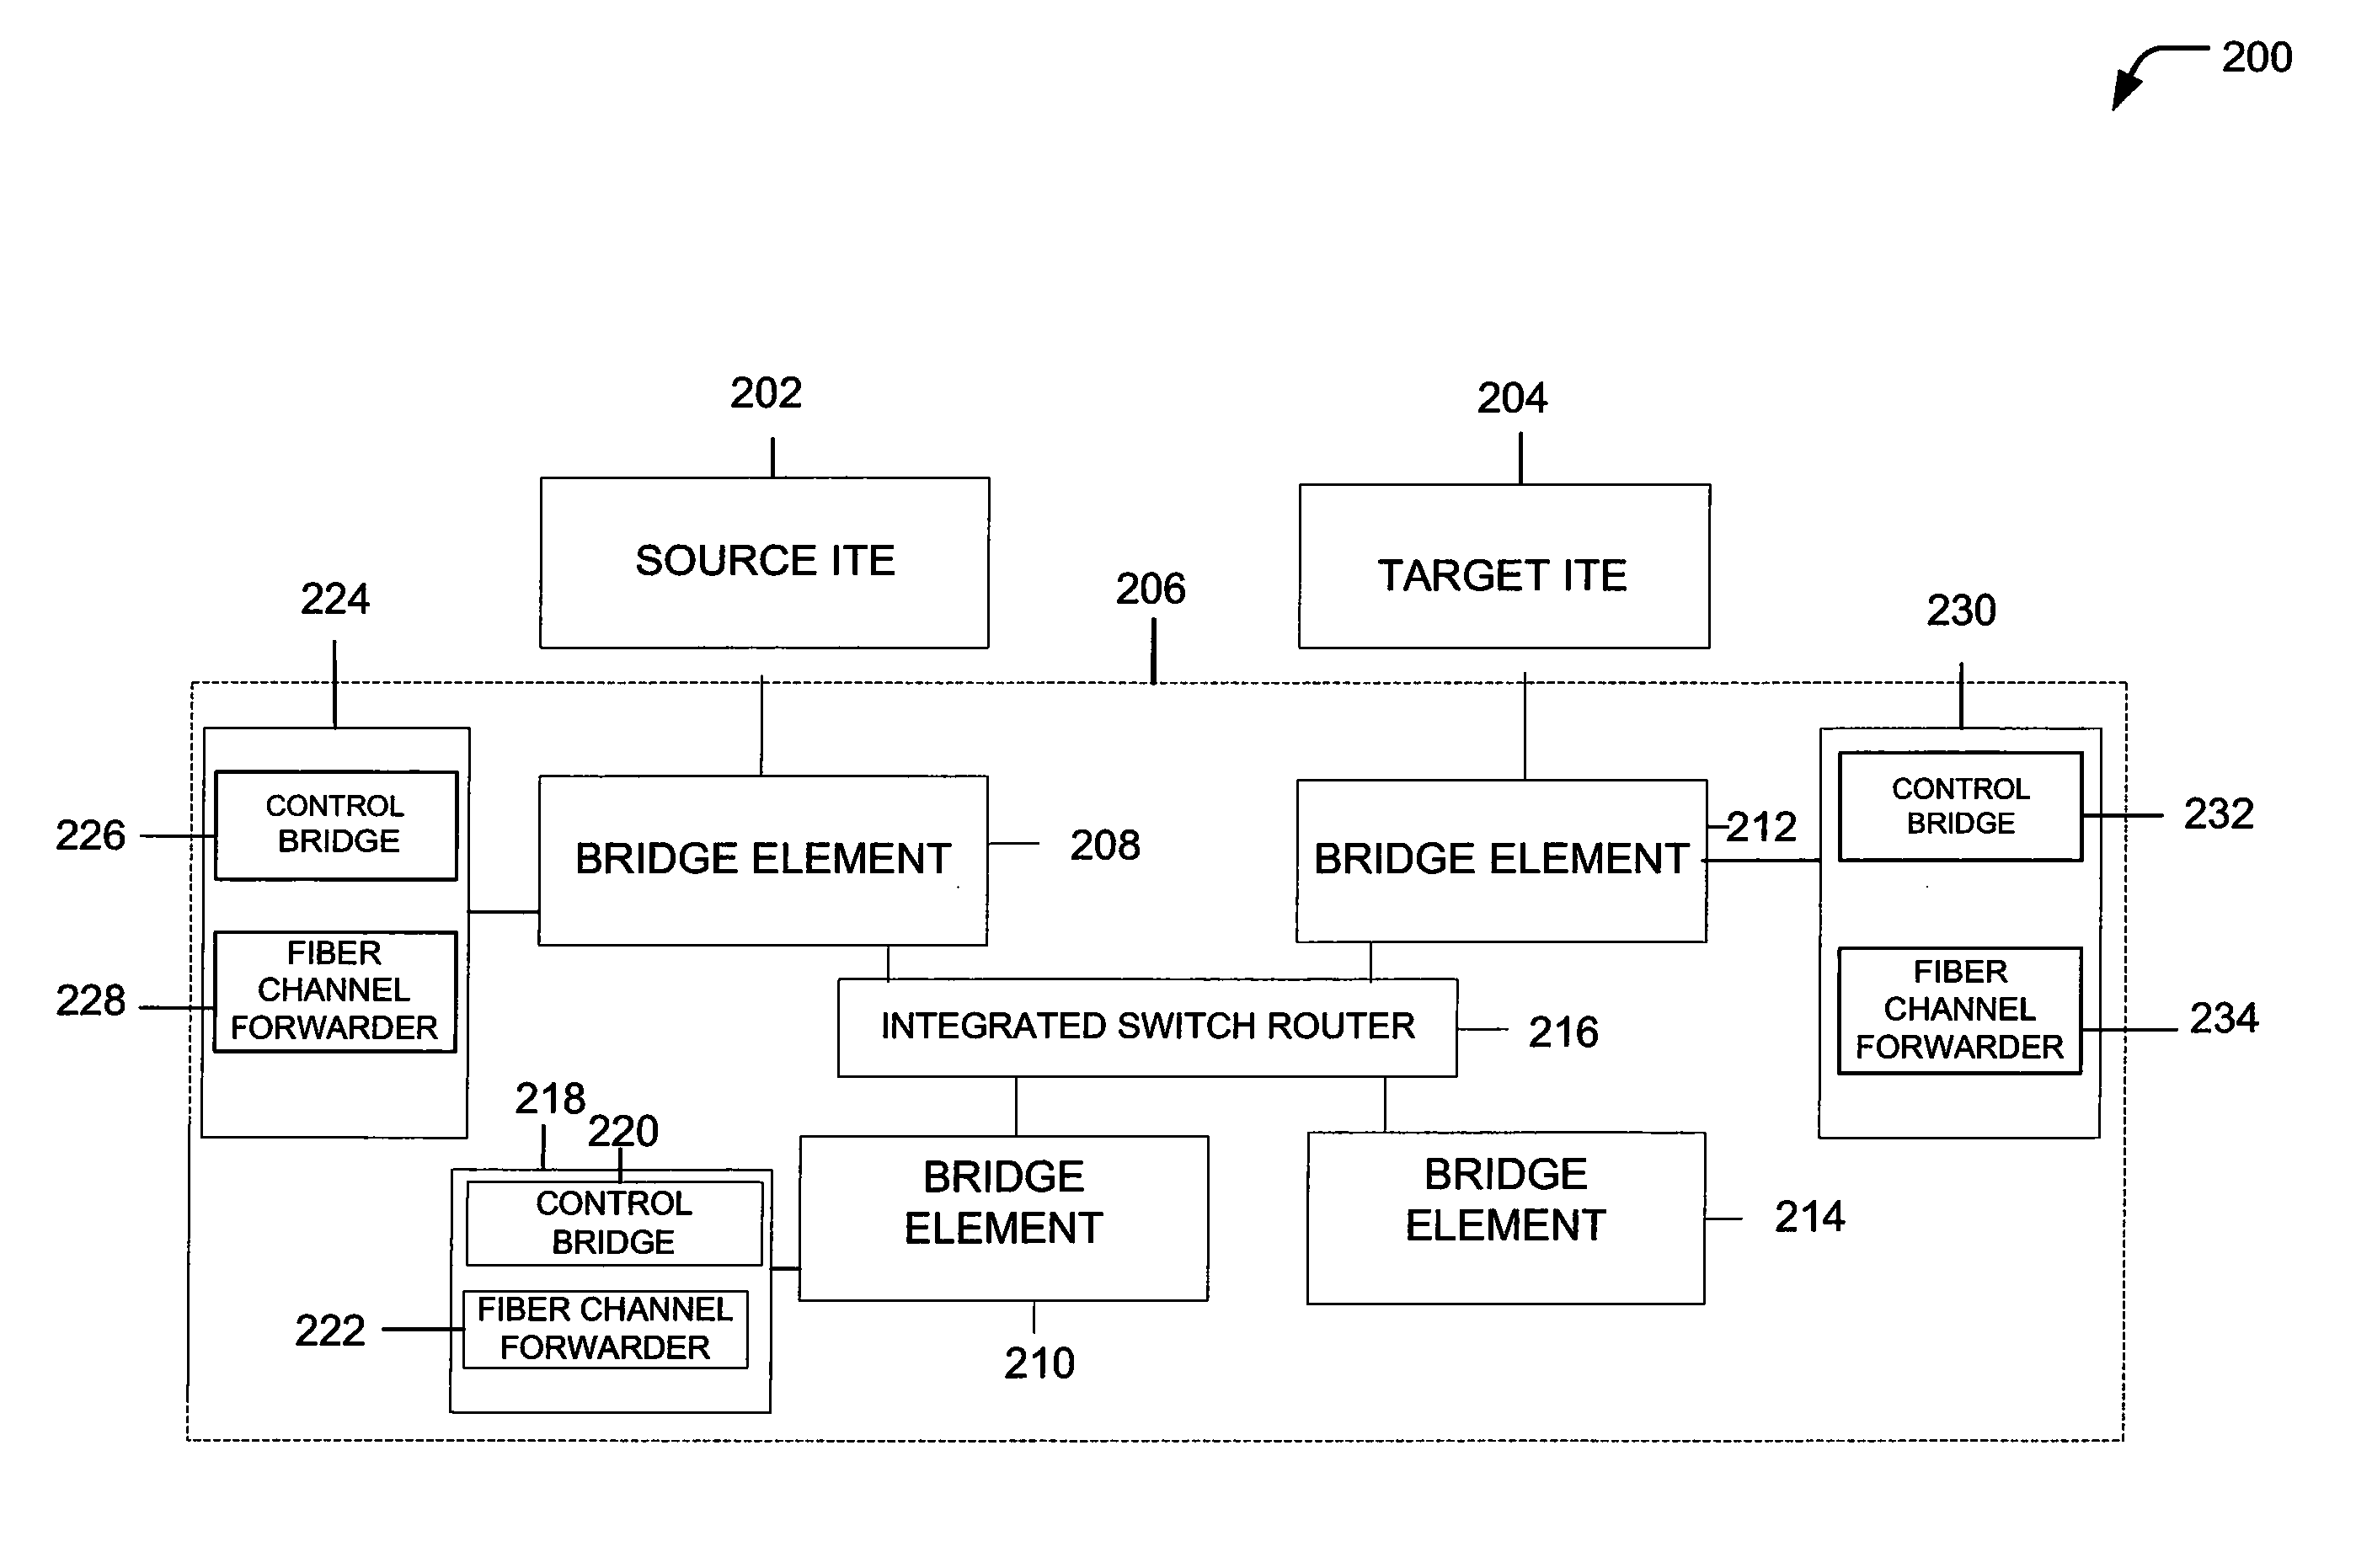 Forwarding Data Frames With a Distributed Fiber Channel Forwarder